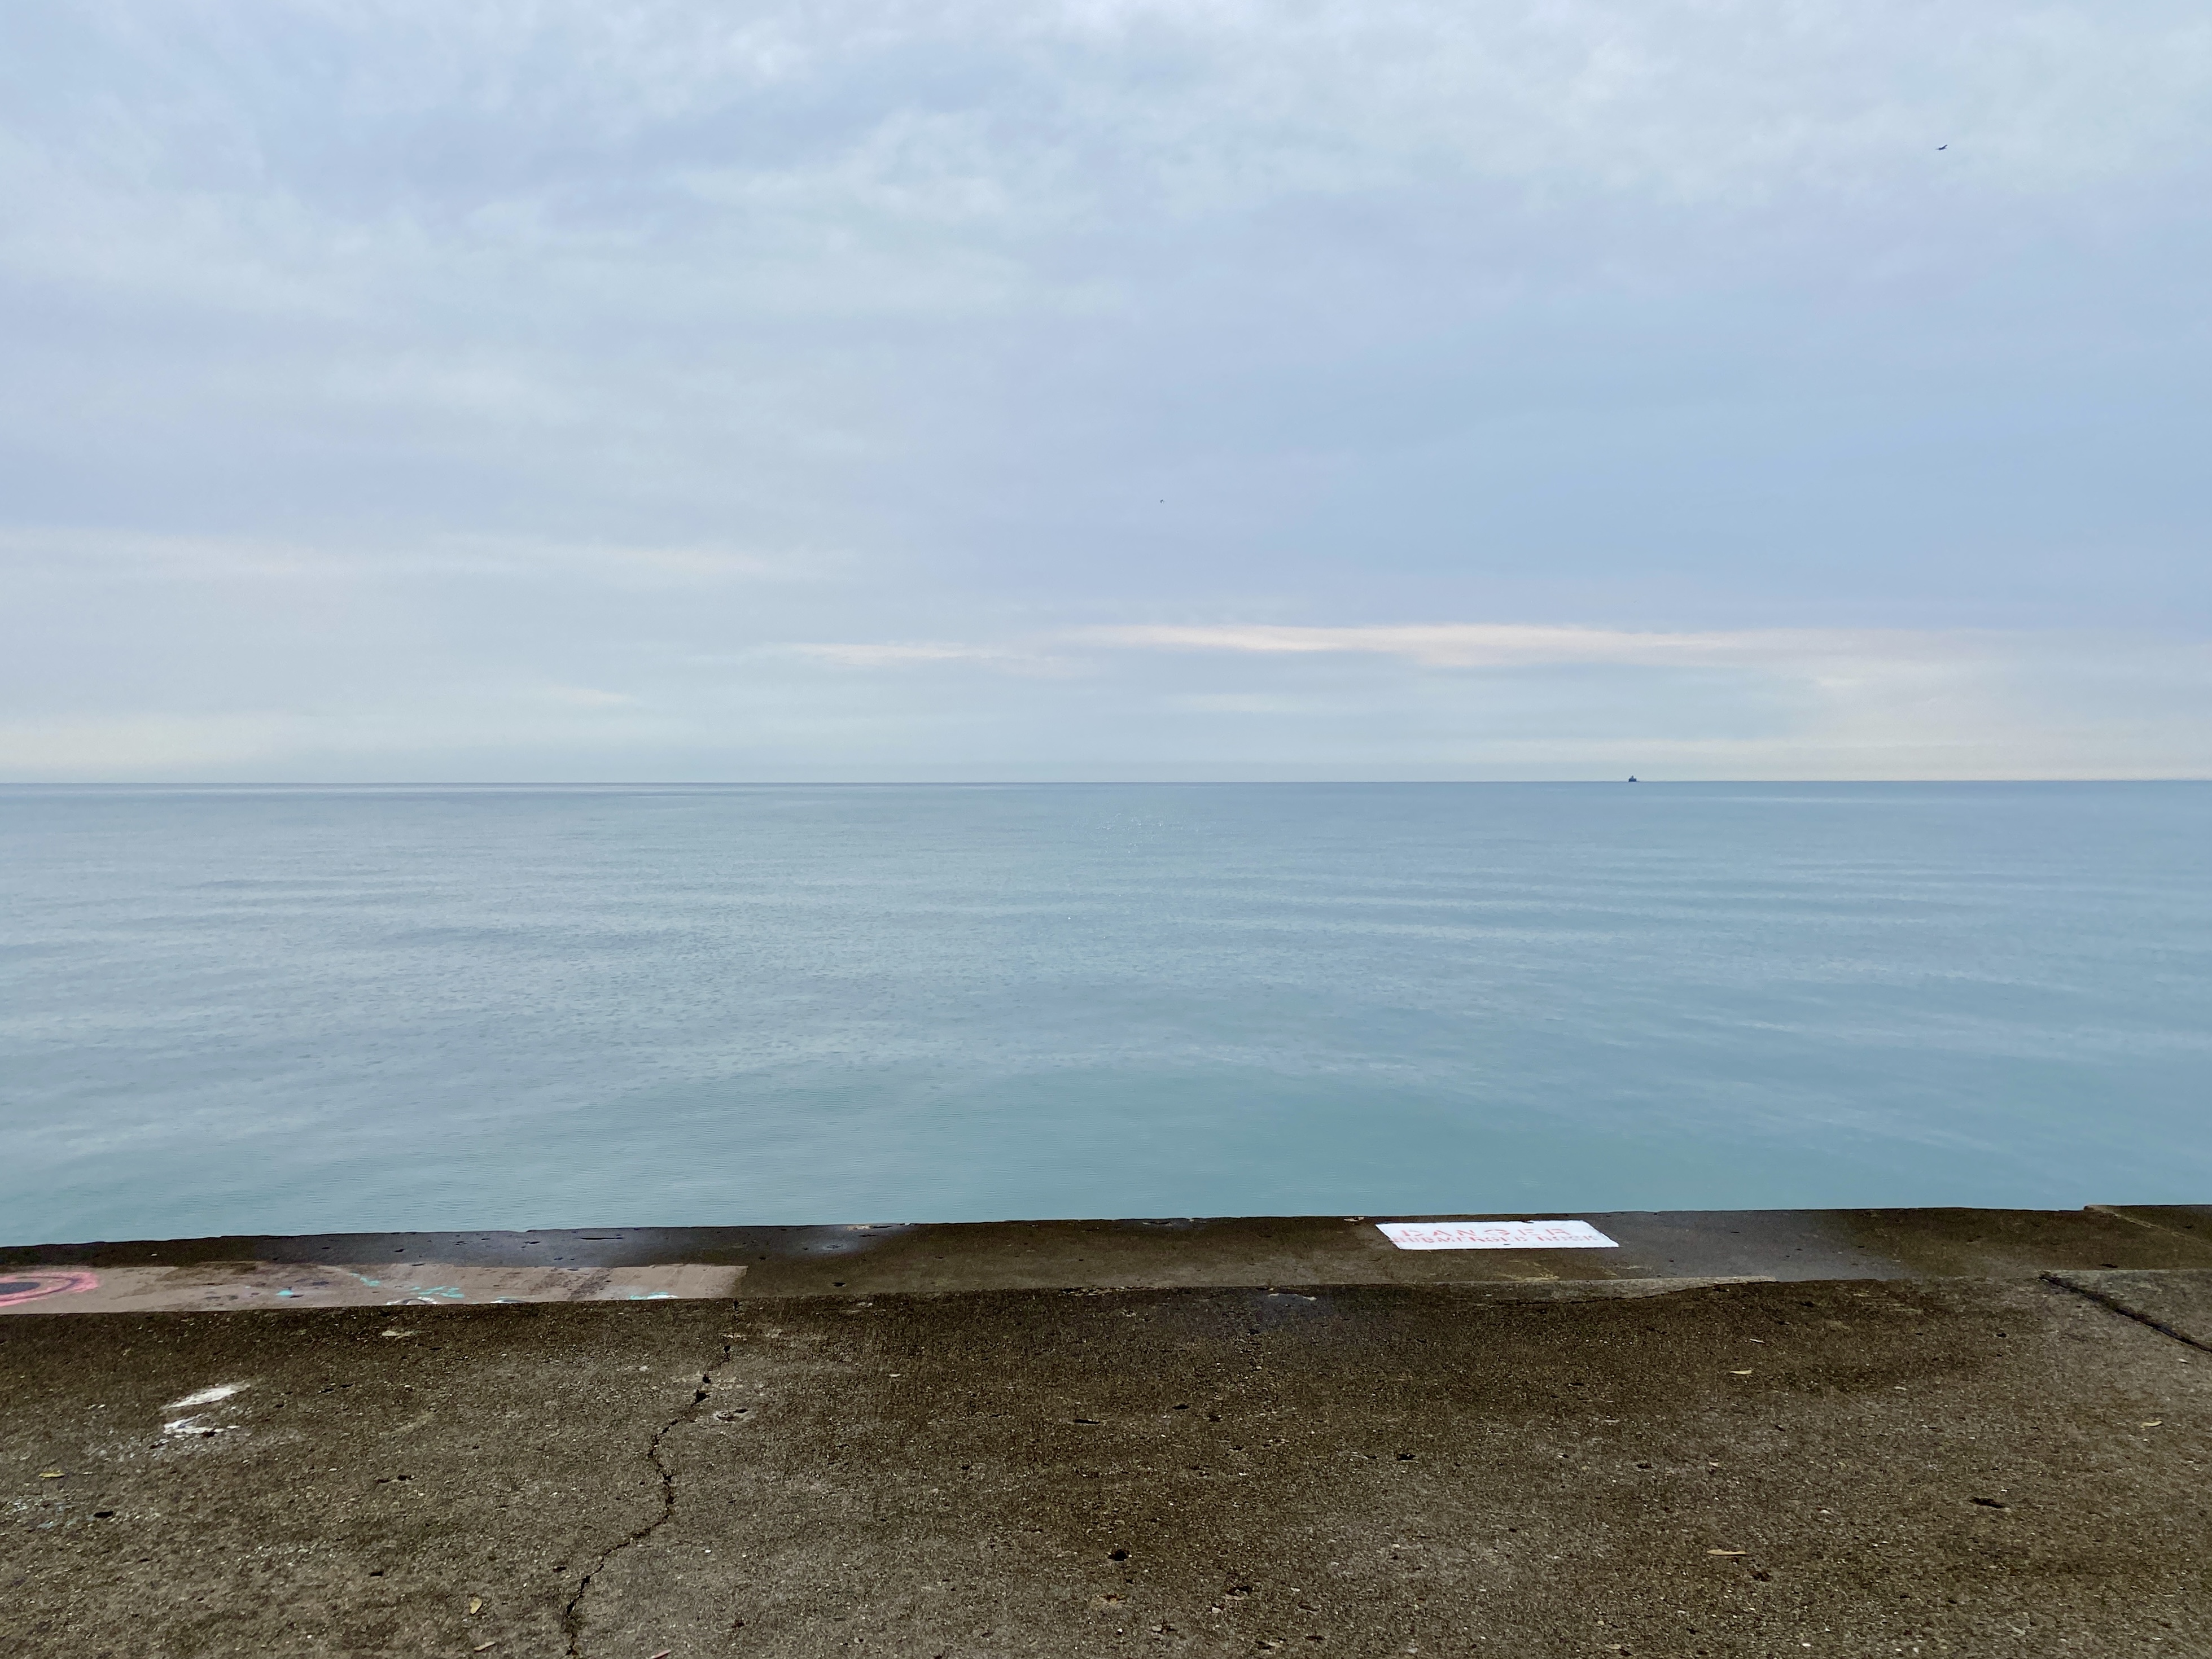 Horizon of a cloudy pale blue sky meeting a large lake with a smooth blue surface, slight pink from a sunrise glinting through, and a strip of concrete in the foreground